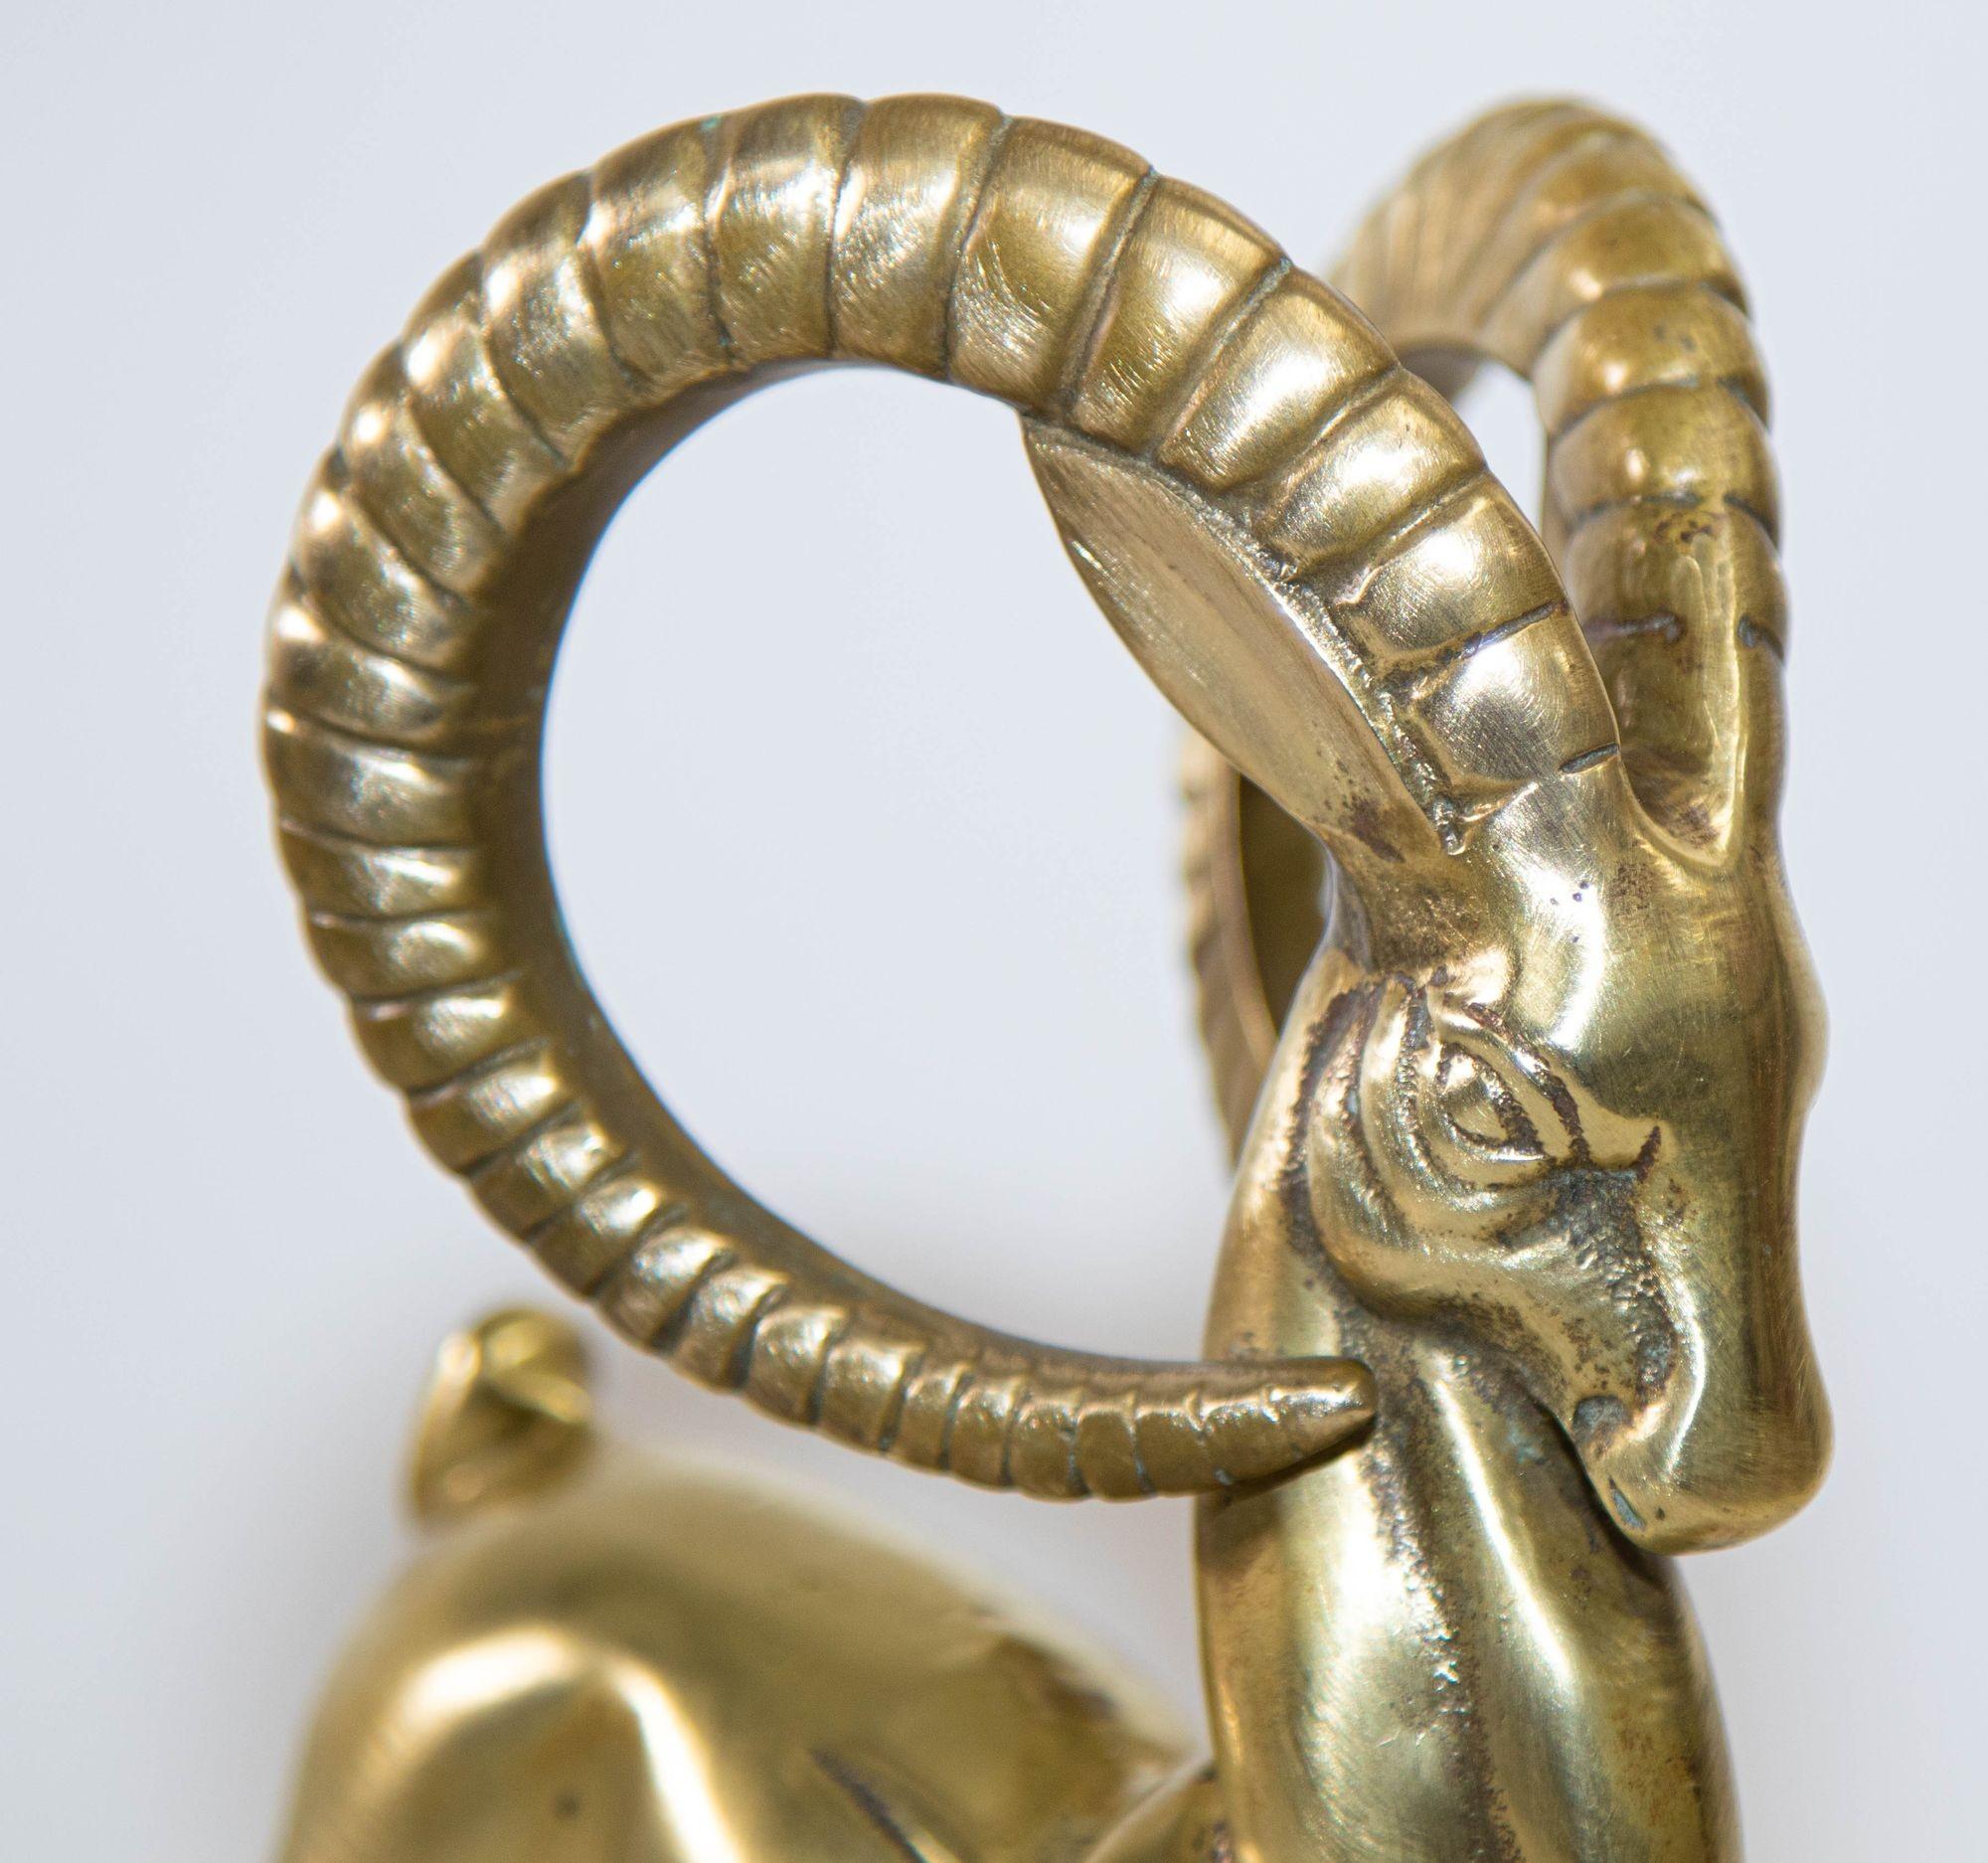 Vintage French Art Deco Style Sculpture of Brass Ibex Antelope 1